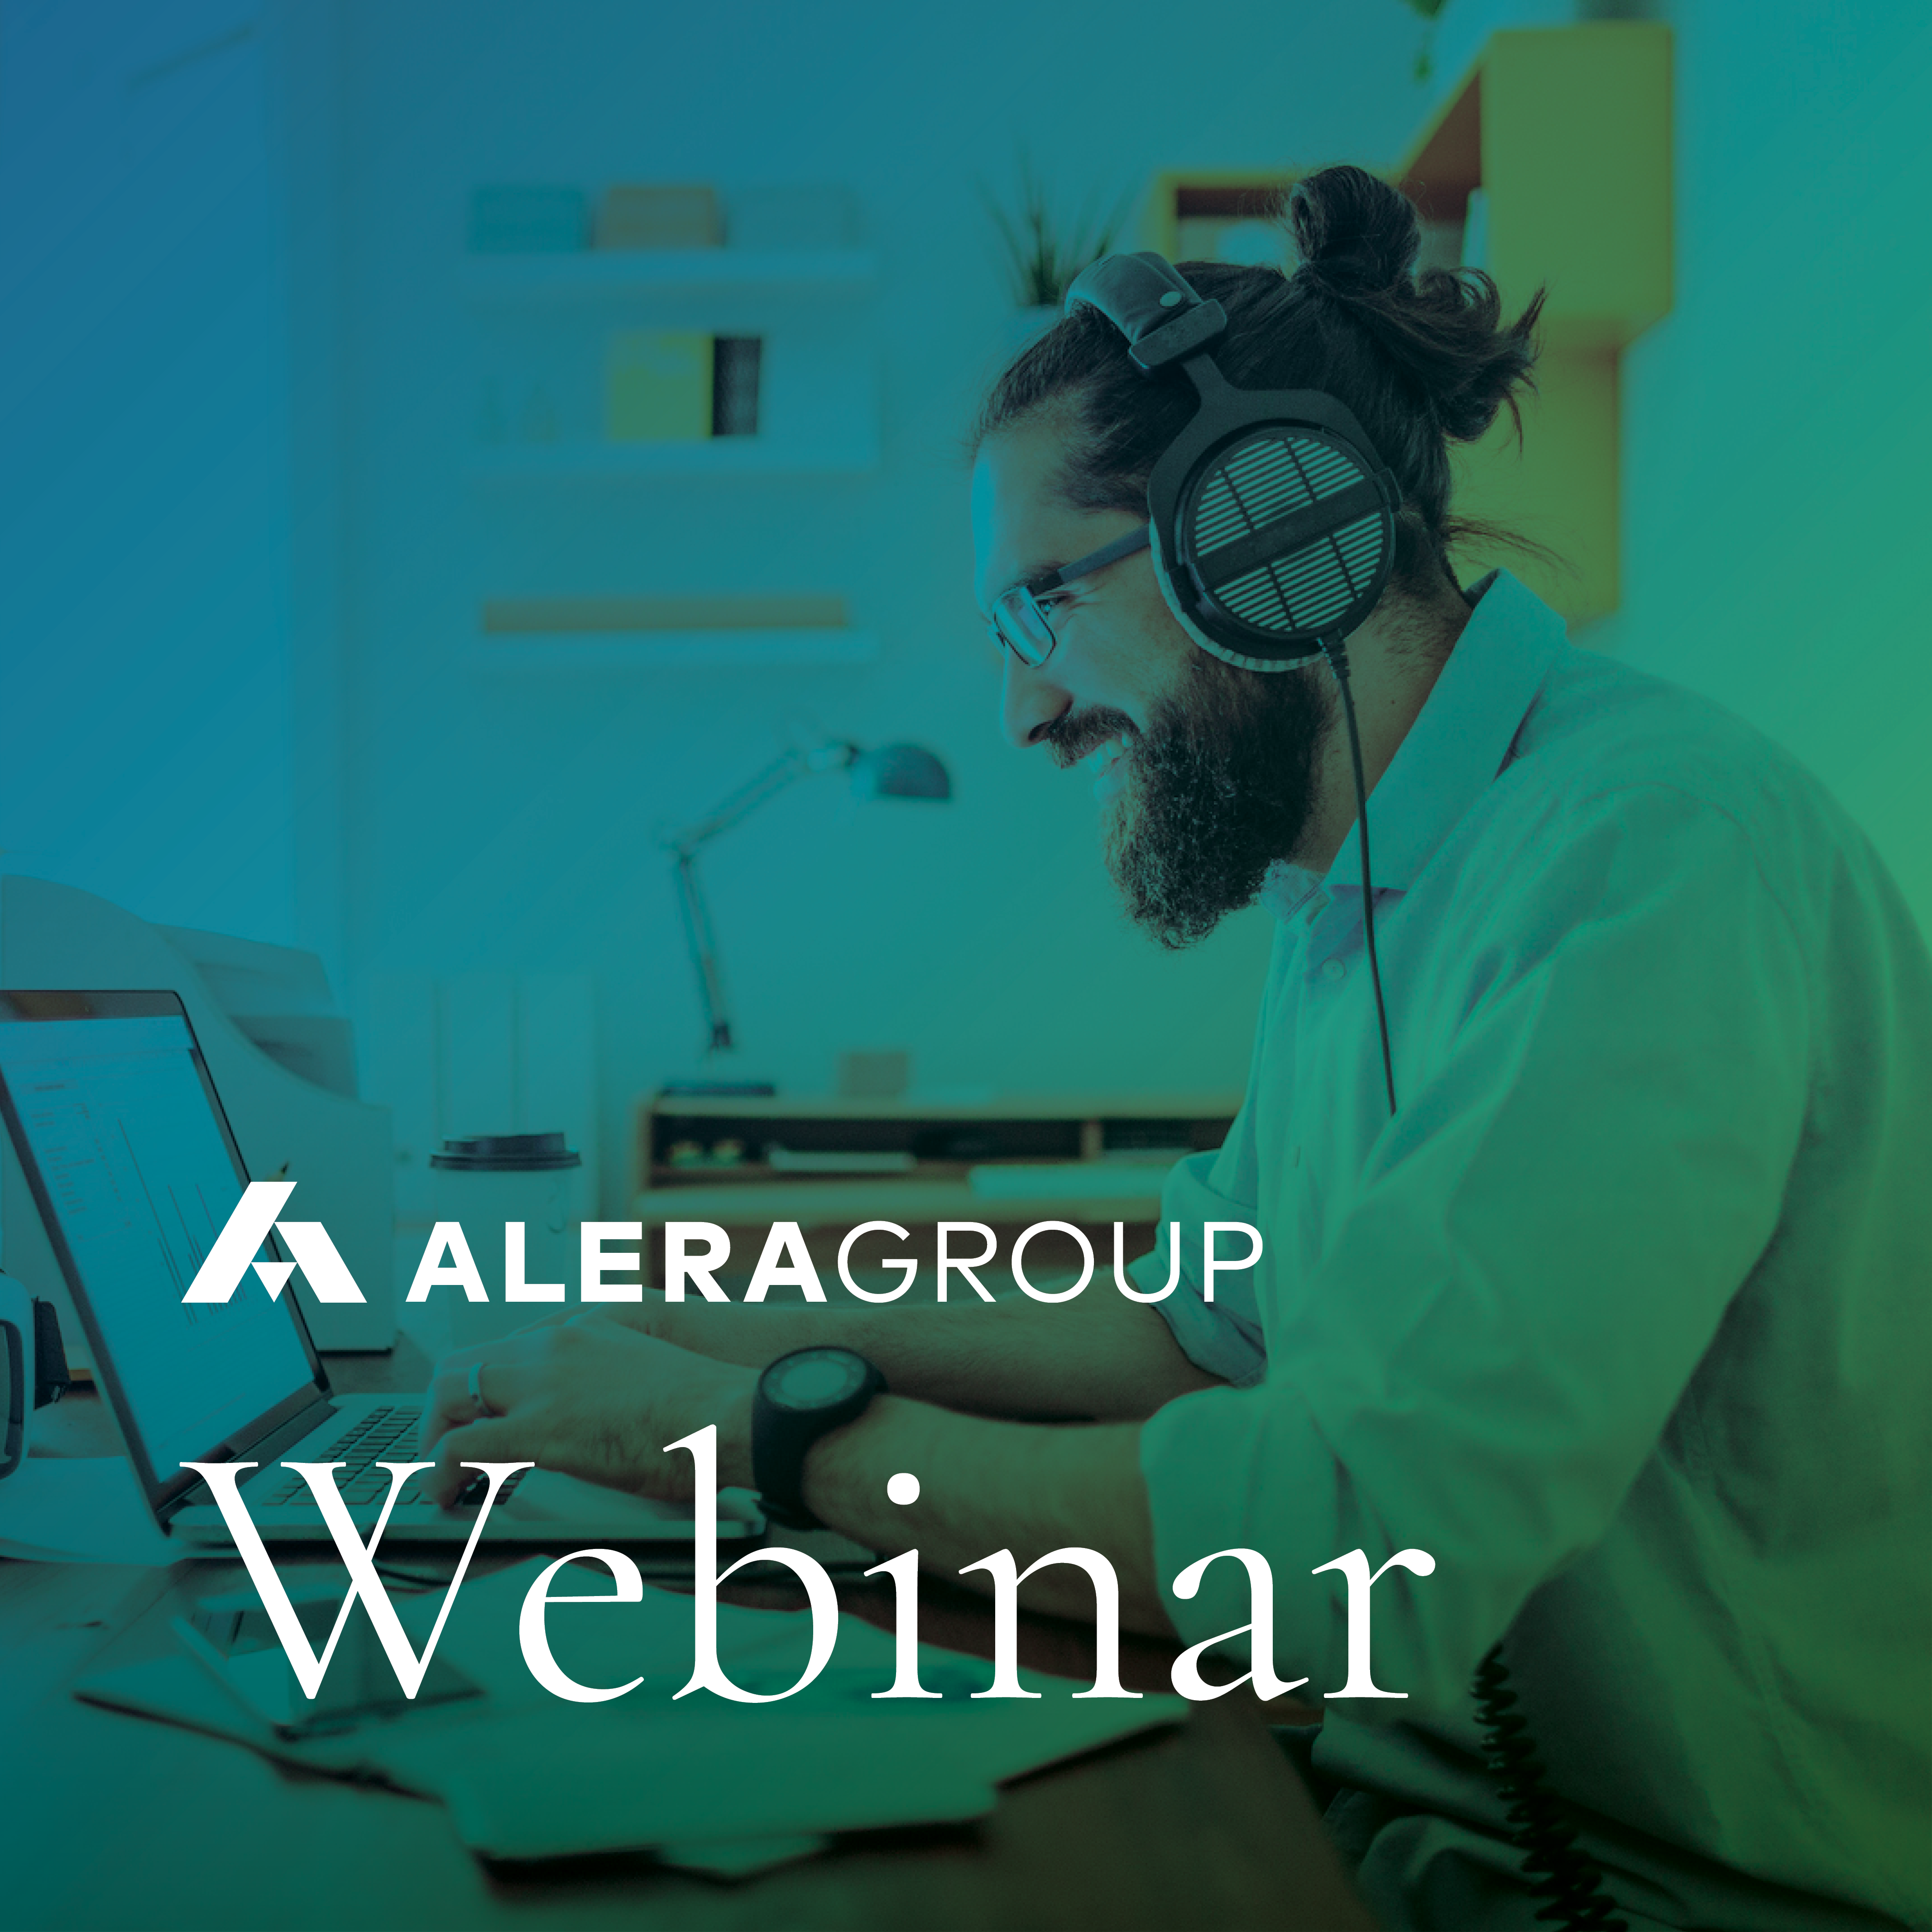 Stock image with the words Alera Group Webinar